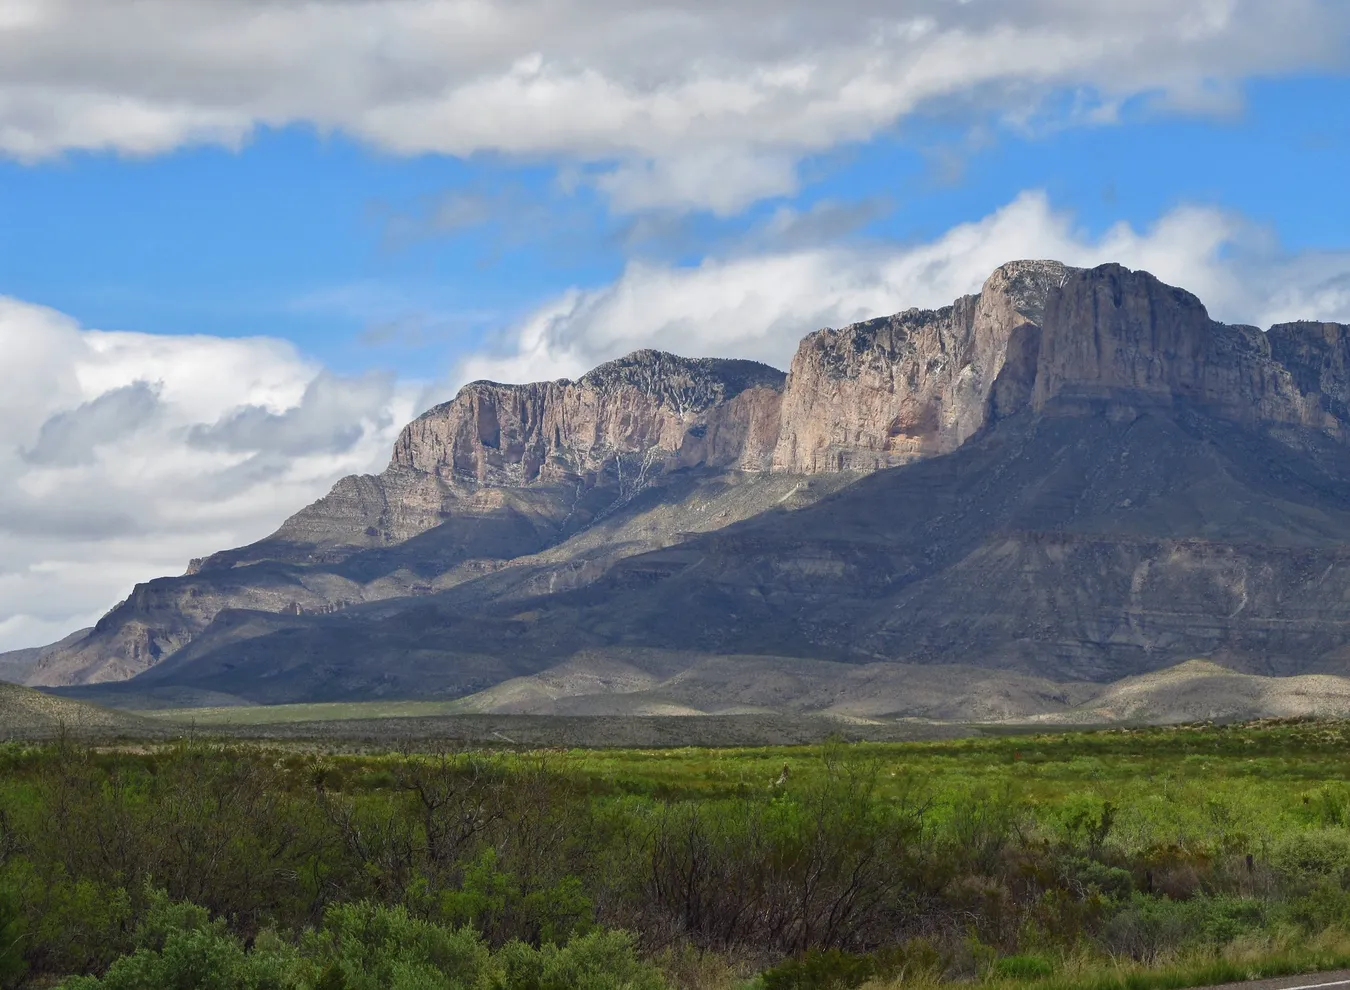 Imagen panorámica del Guadalupe Mountains National Park